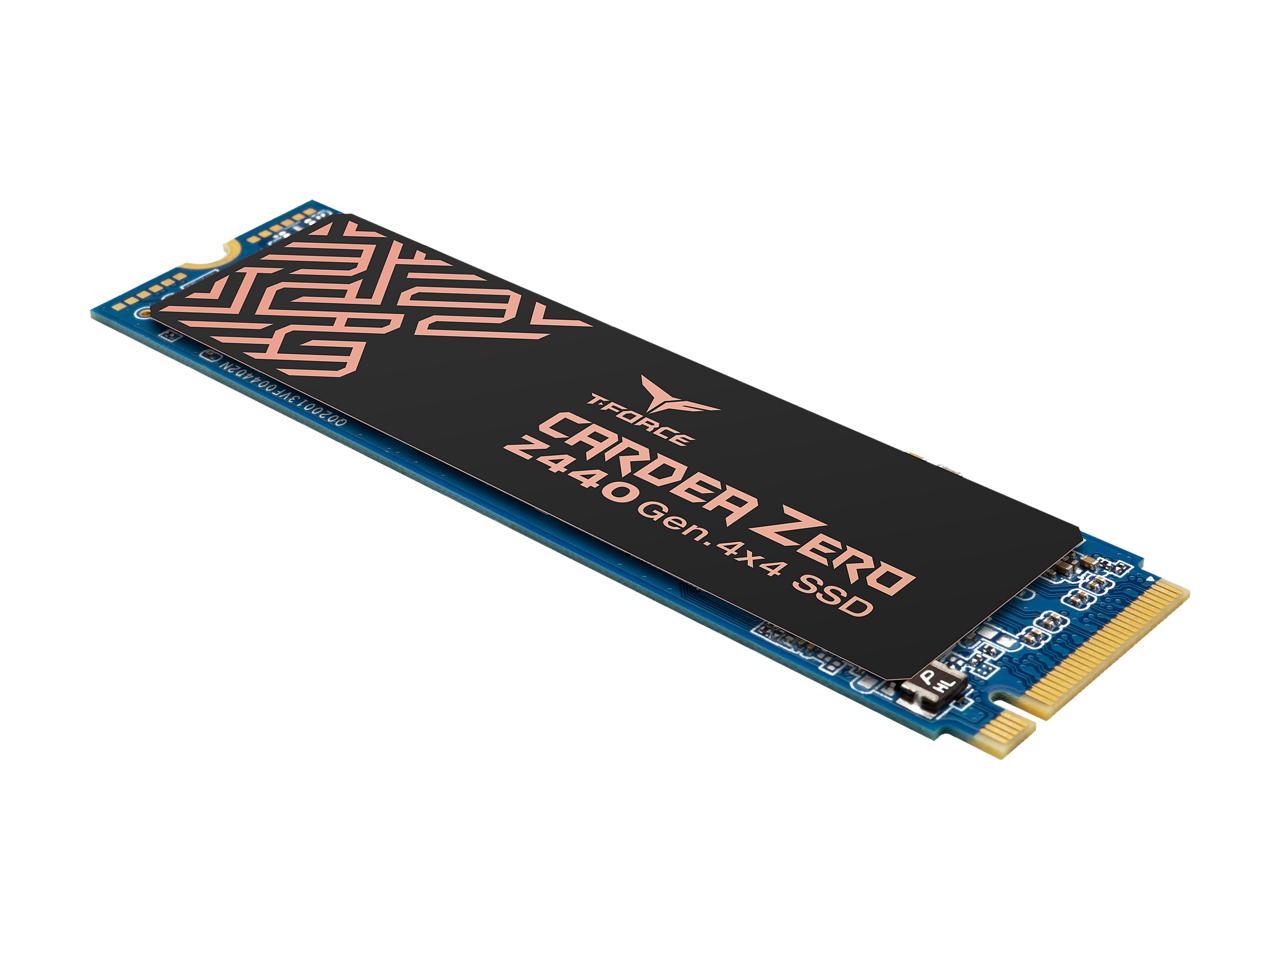 Team Group T-Force Cardea Zero Z440 M.2 2280 1Tb Pcie Gen 4.0 X4 With Nvme 1.3 3D Nand Internal Solid State Drive (Ssd) Tm8Fp7001T0C311